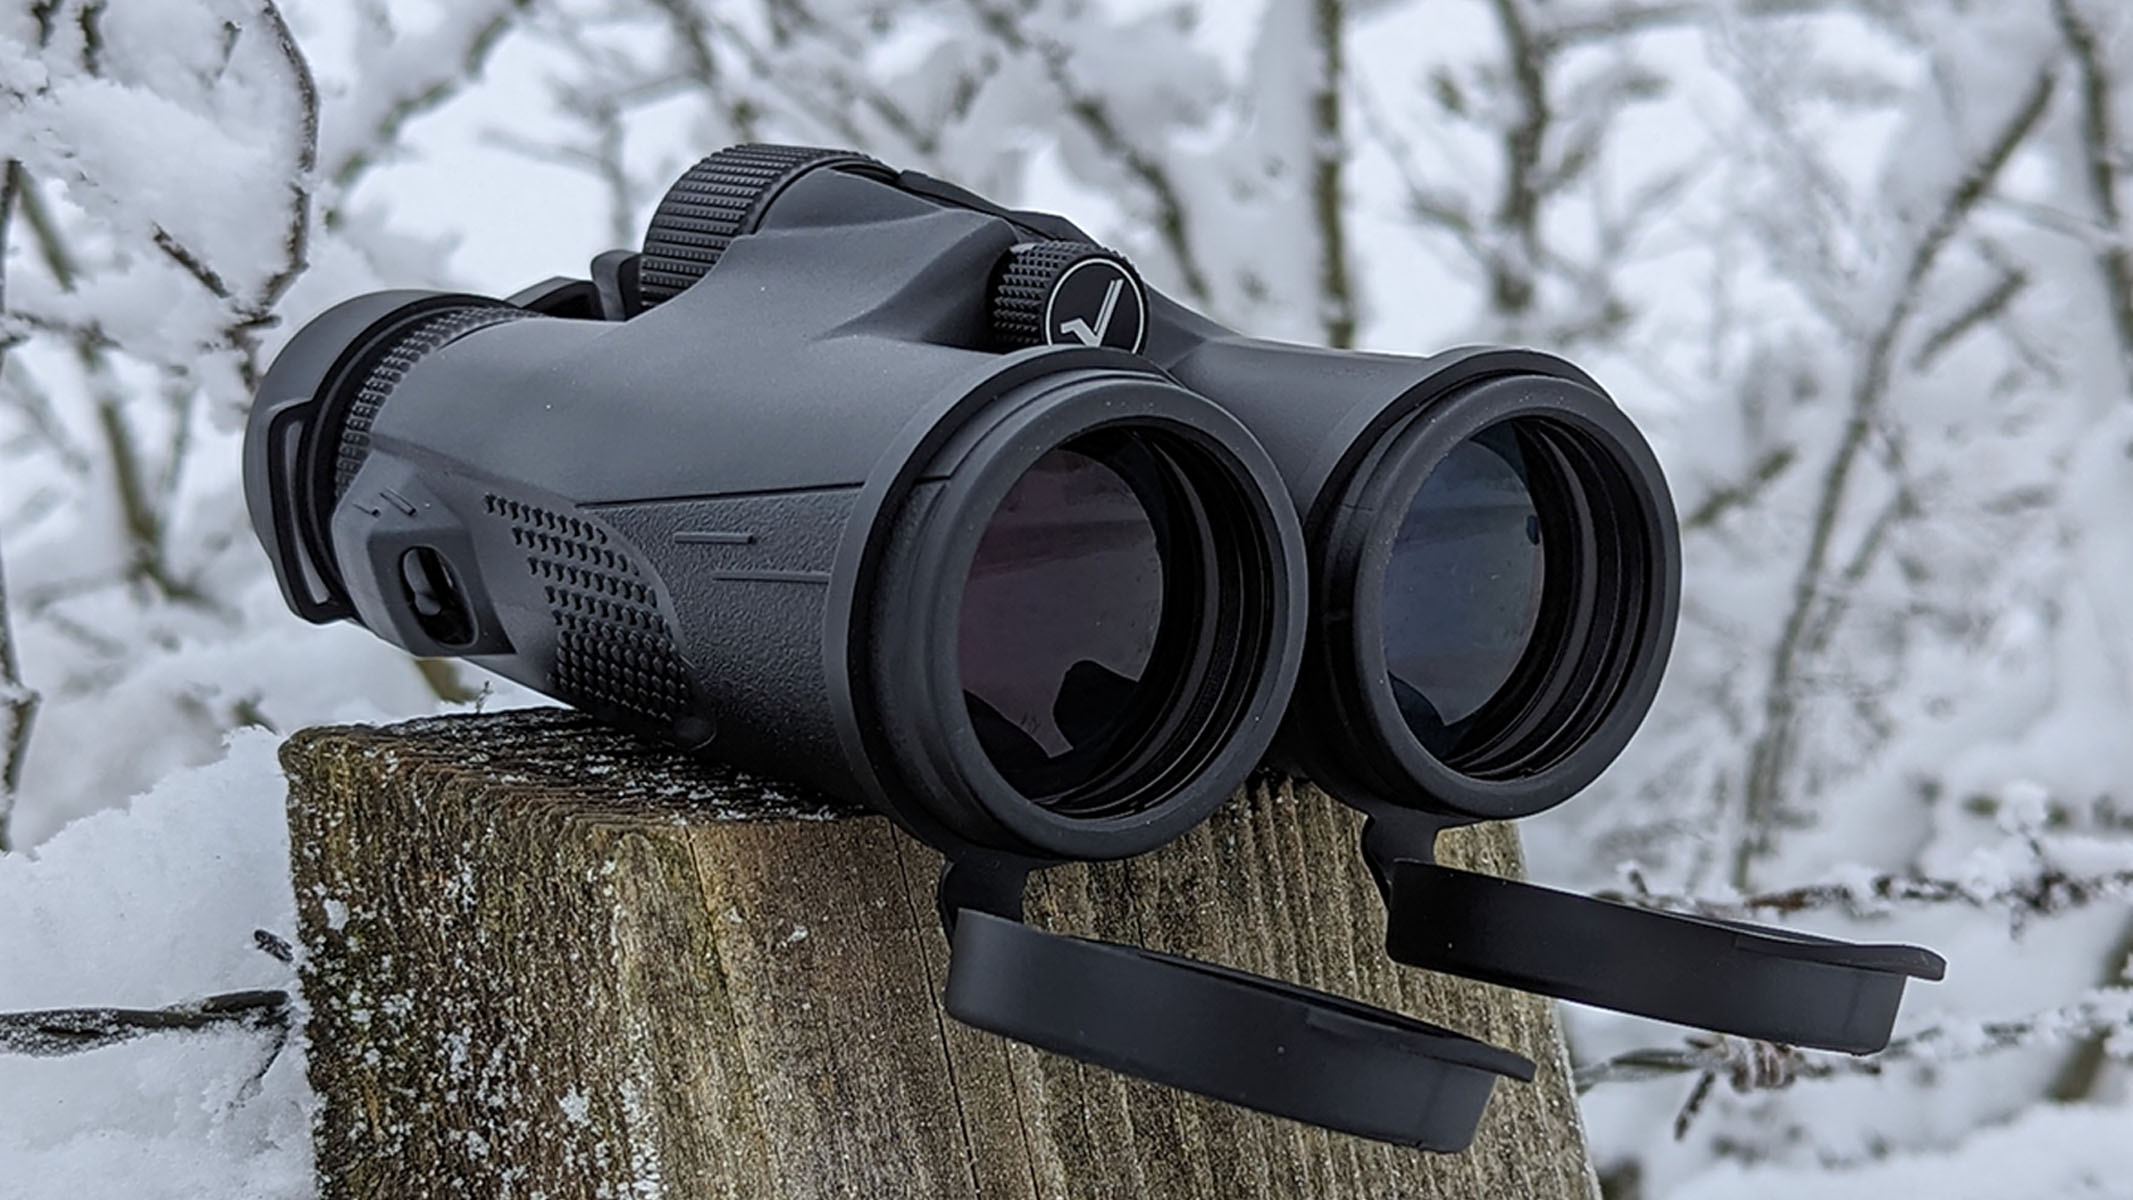 Front view of binoculars on a snowy post